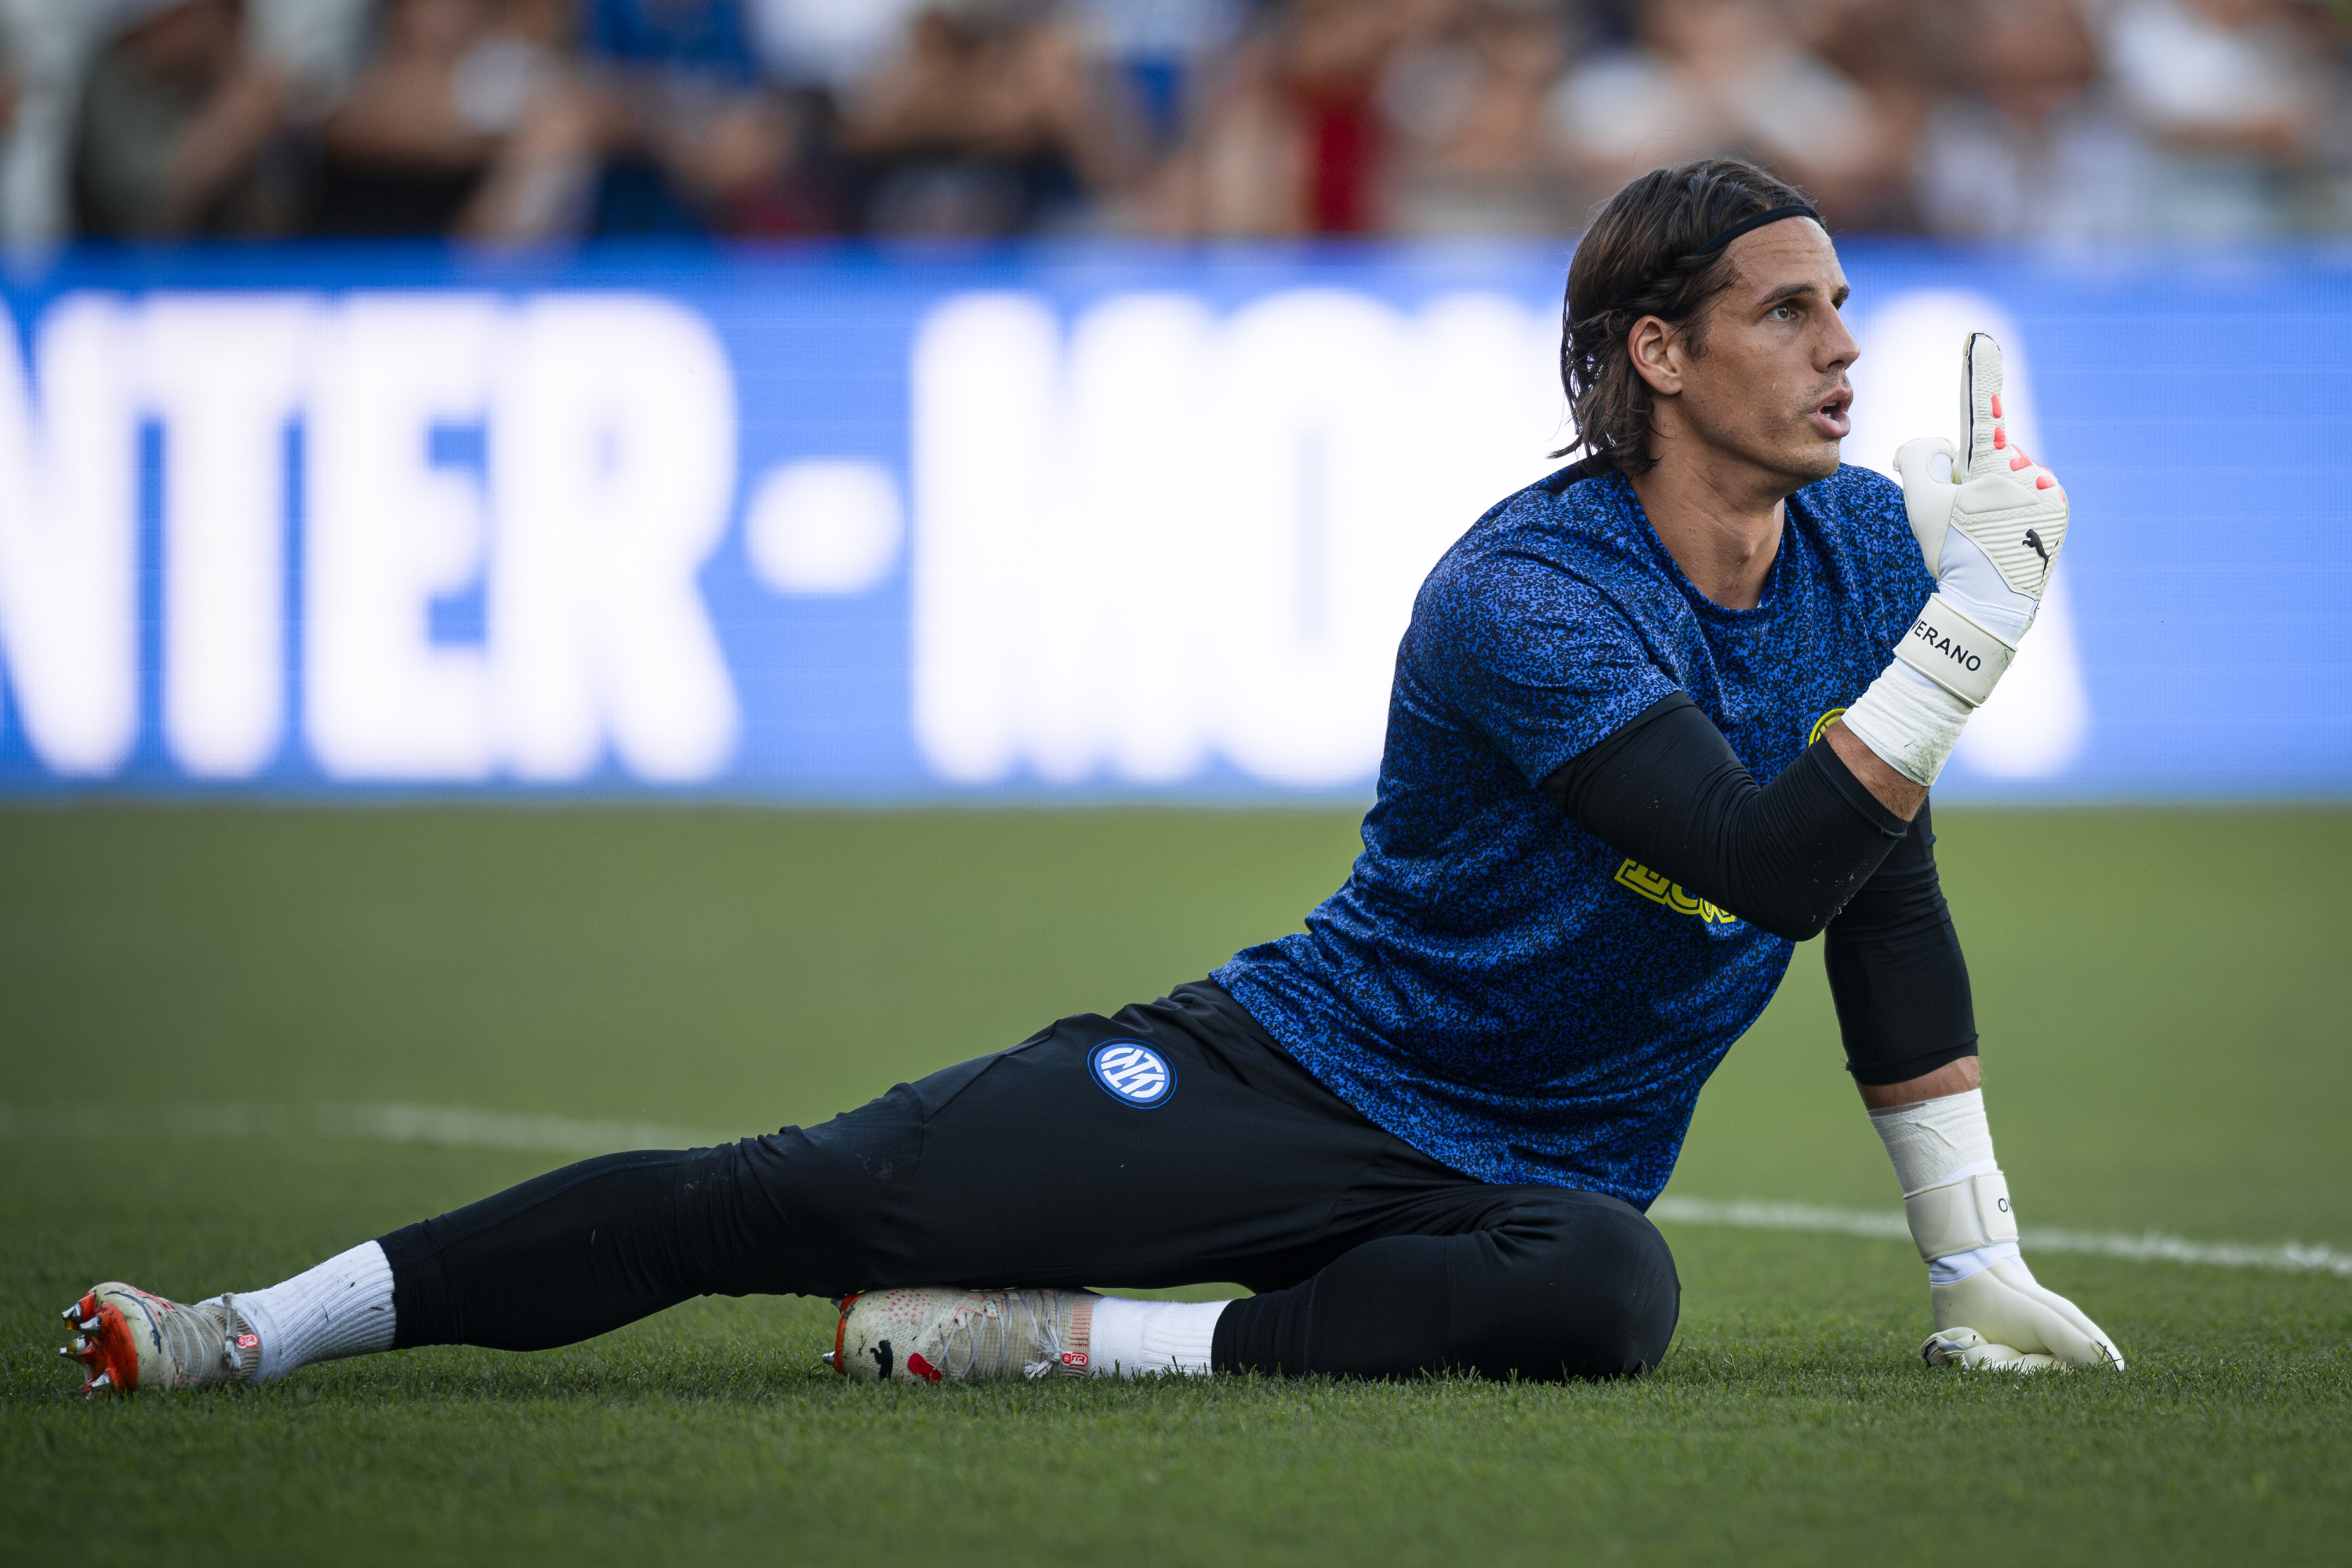 STADIO PAOLO MAZZA, FERRARA, ITALY - 2023/08/13: Yann Sommer of FC Internazionale gestures during warm up prior to the friendly football match between FC Internazionale and KF Egnatia. FC Internazionale won 4-2 over KF Egnatia. (Photo by Nicolò Campo/LightRocket via Getty Images)